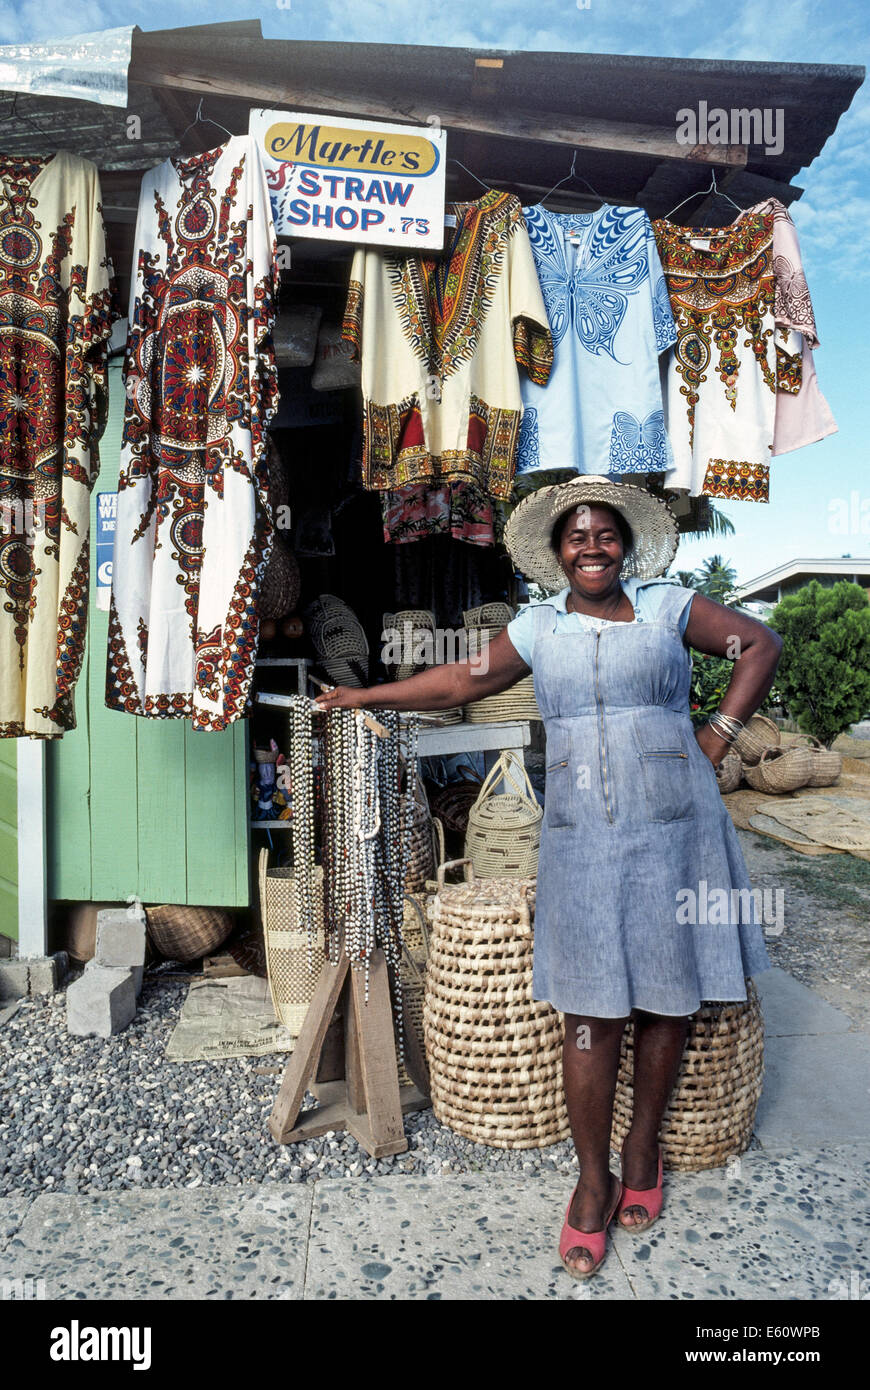 The smiling owner of Myrtle's Straw Shop shows off her baskets, hats and other wares at a Caribbean outdoor craft market in Ocho Rios, Jamaica. Stock Photo